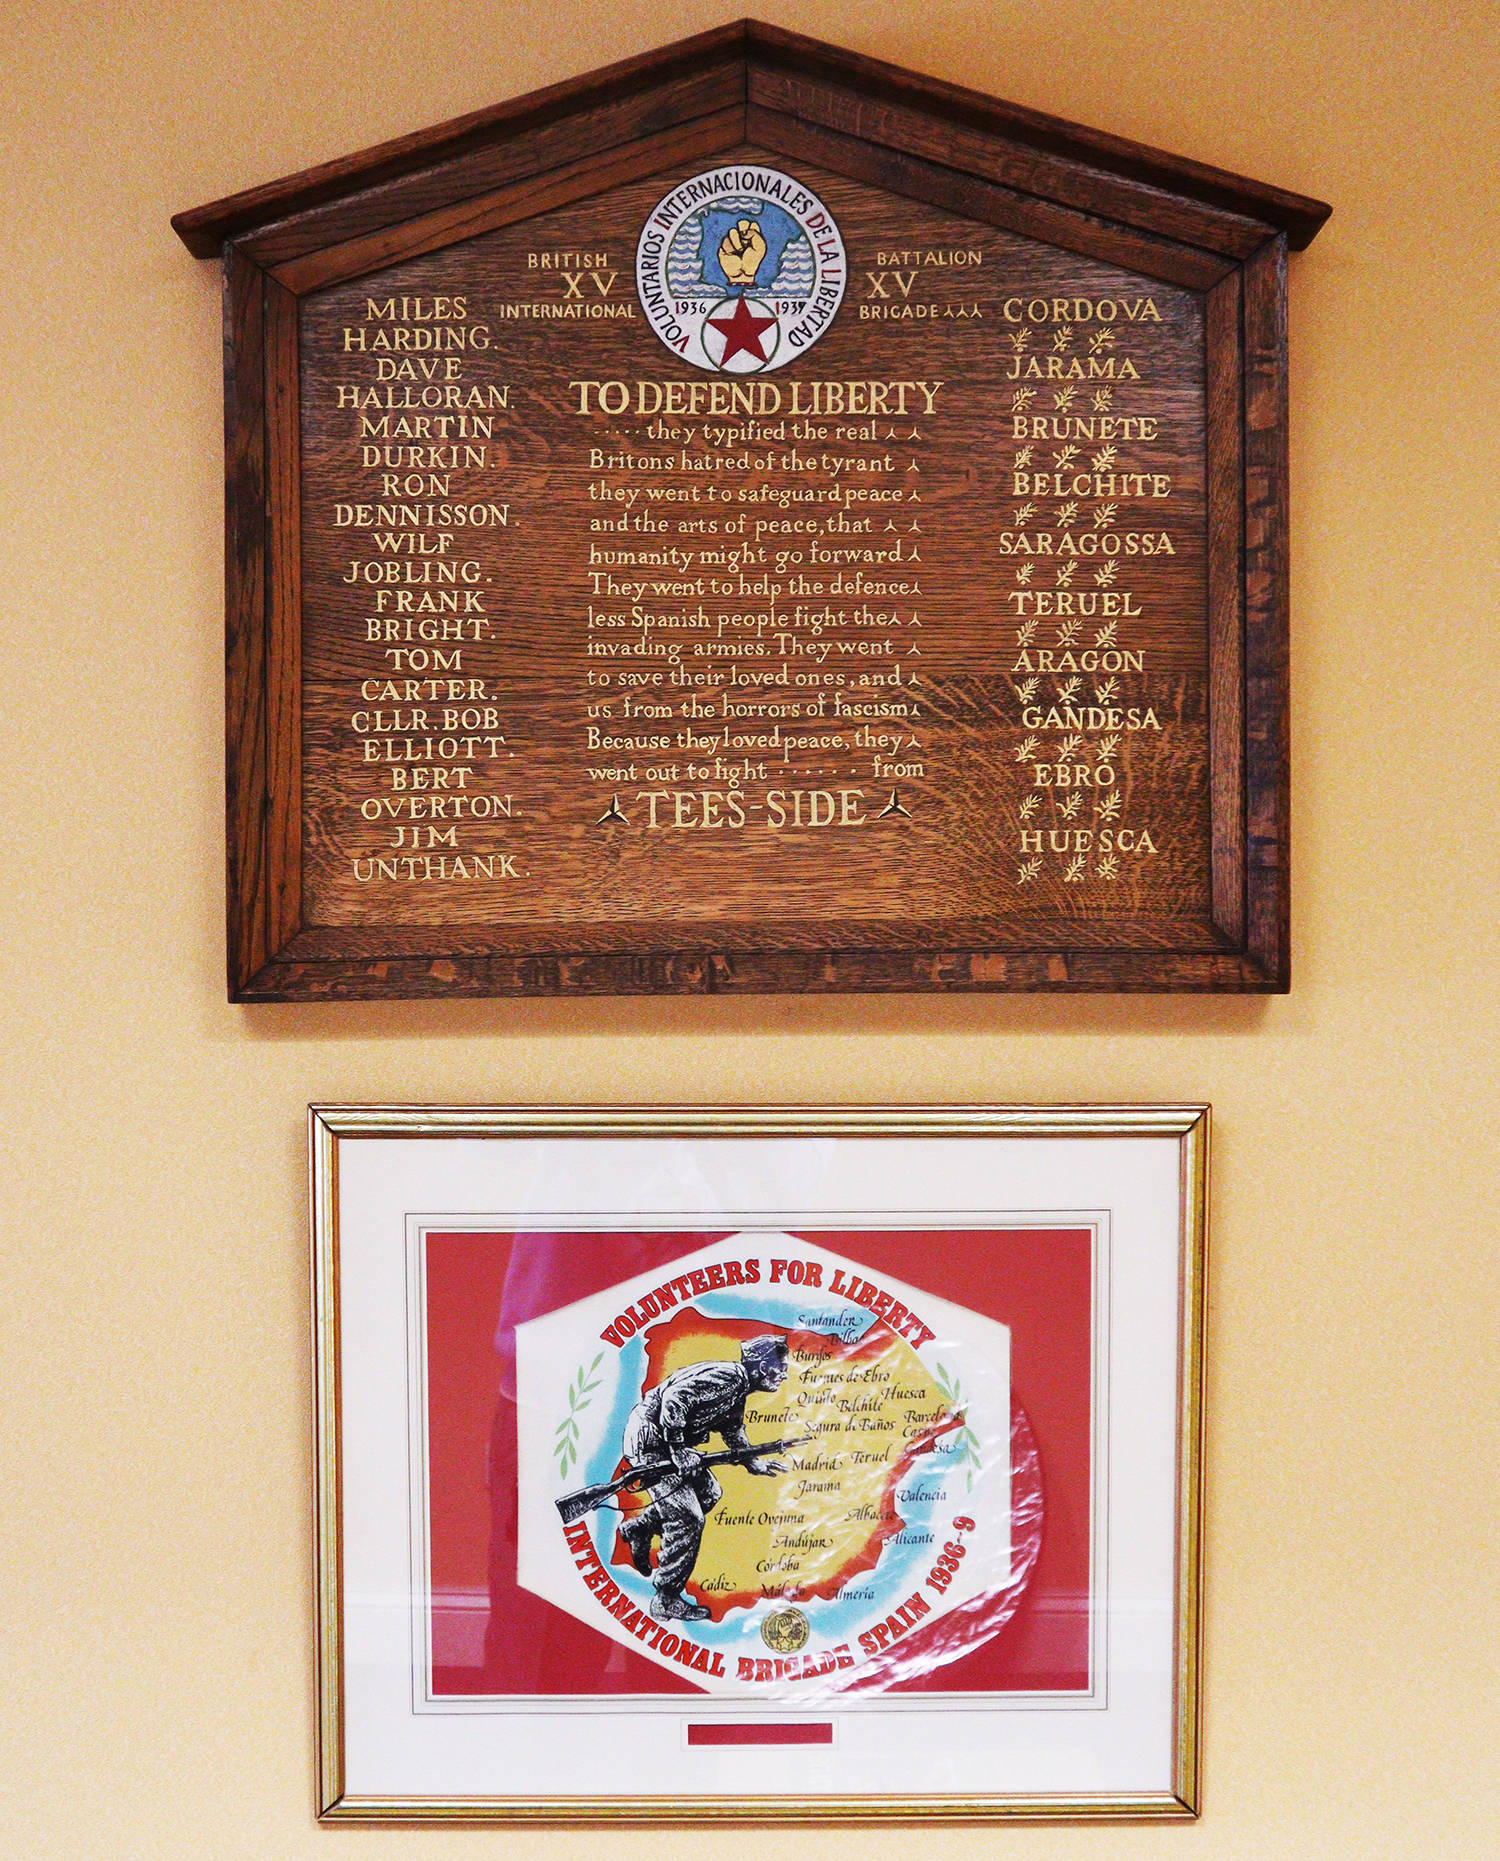 The Teesside International Brigades memorial plaque in Middlesbrough Town Hall